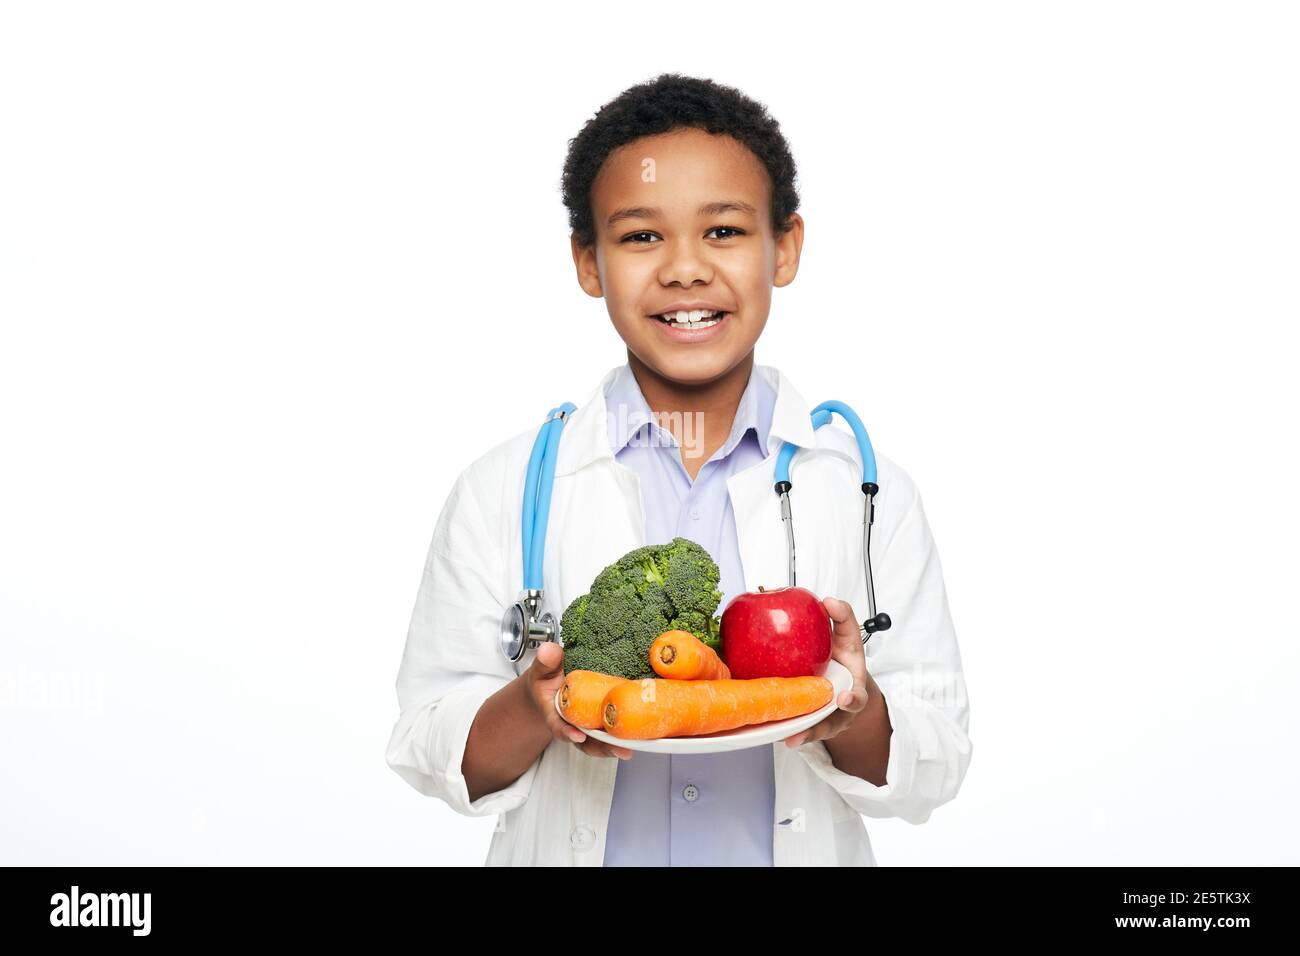 Young African American child, dressed as a doctor, recommends vegetables and fruits for proper nutrition and benefits to your health Stock Photo